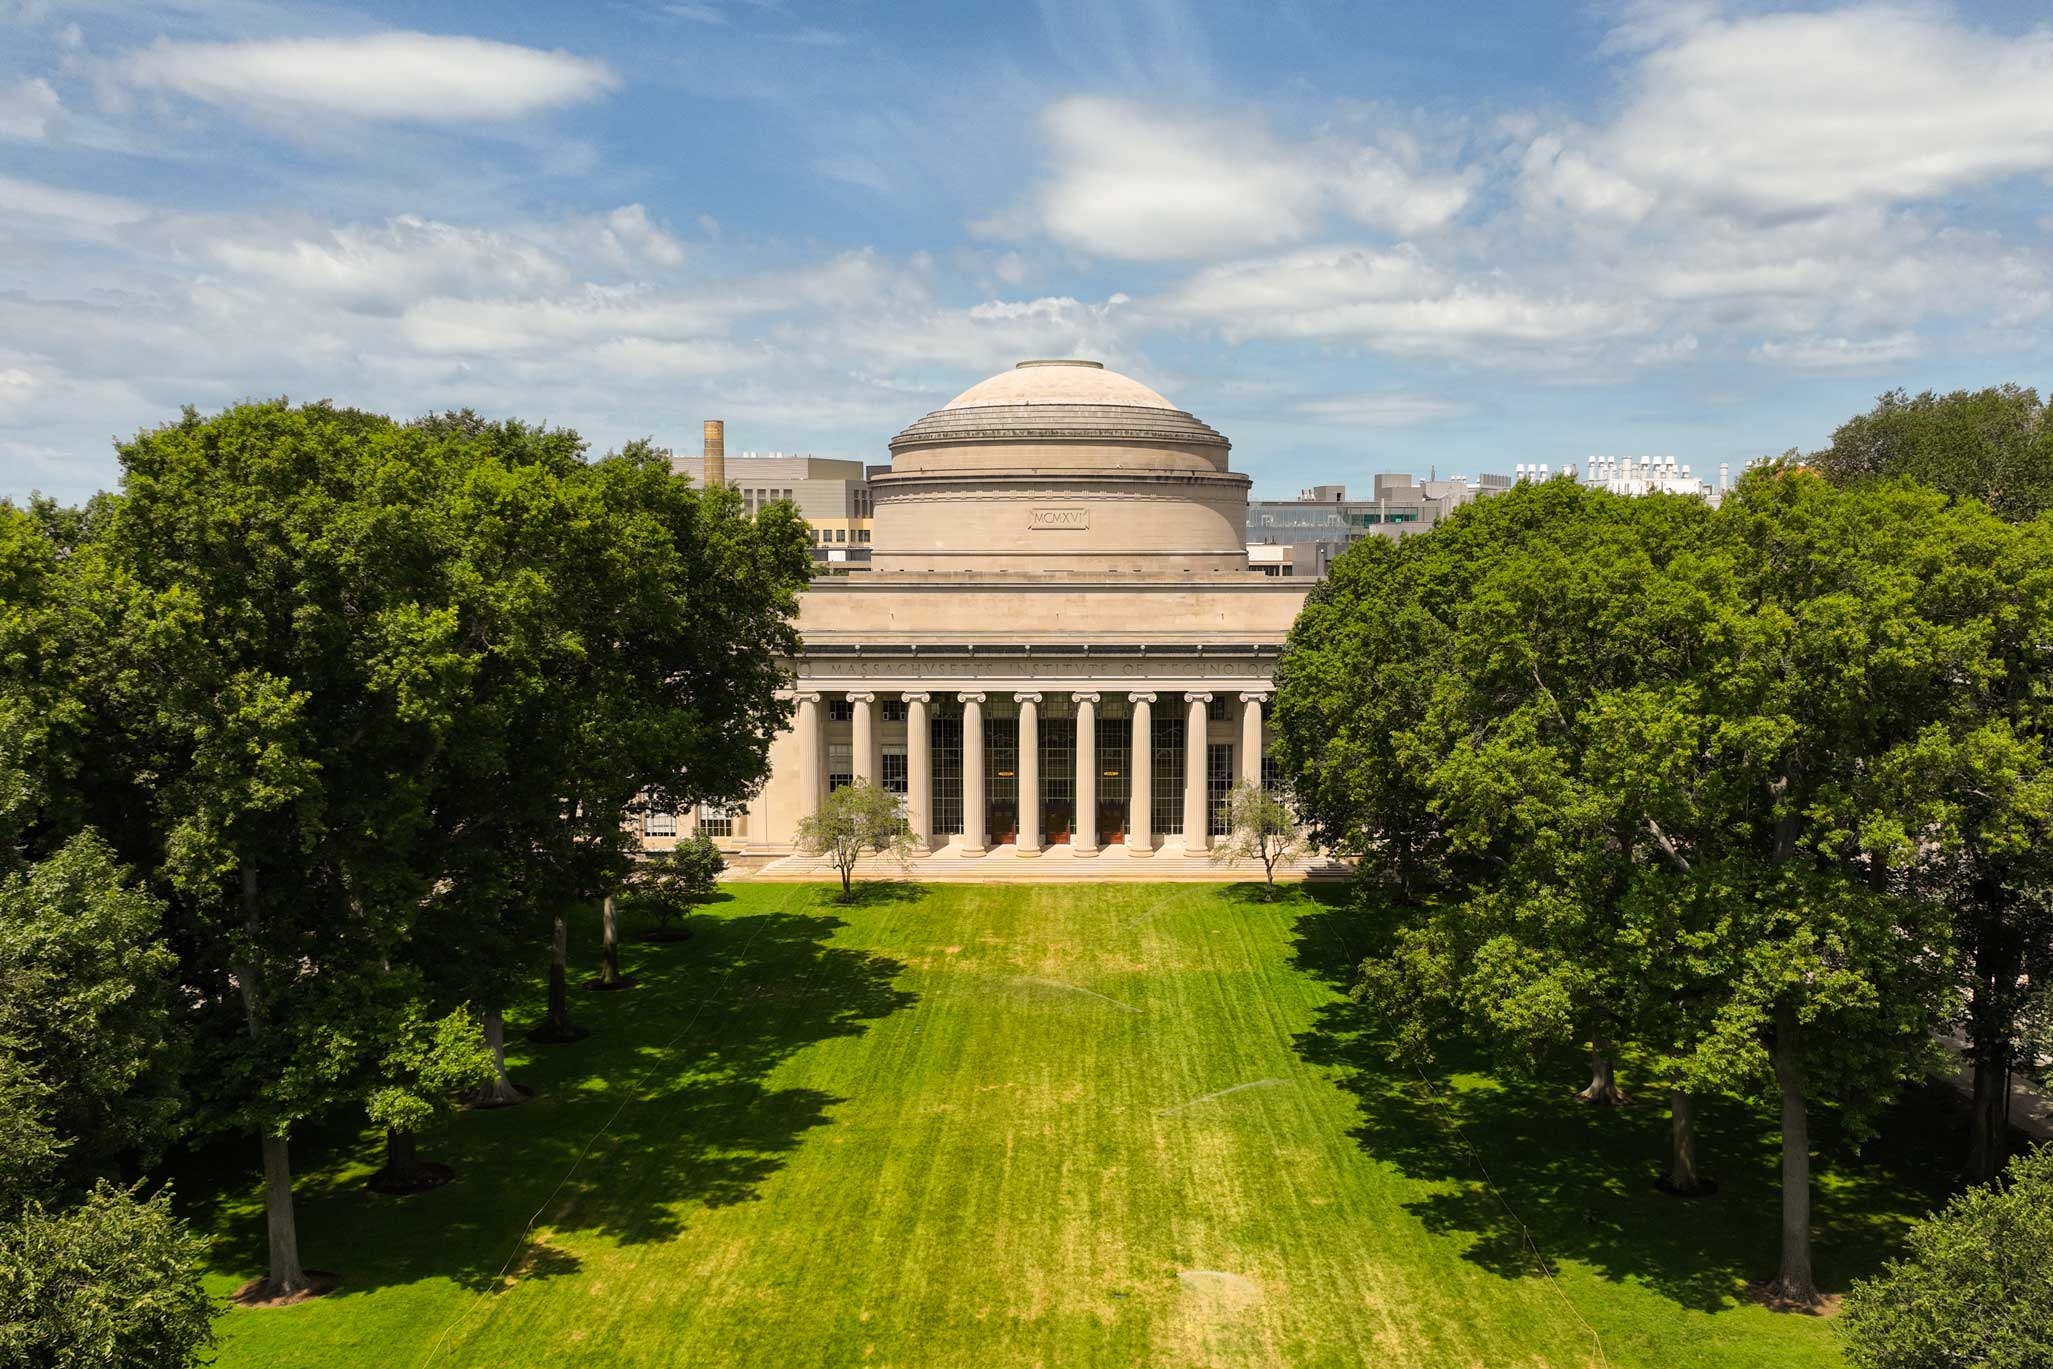 MIT named No. 2 university by U.S. News for 2023-24